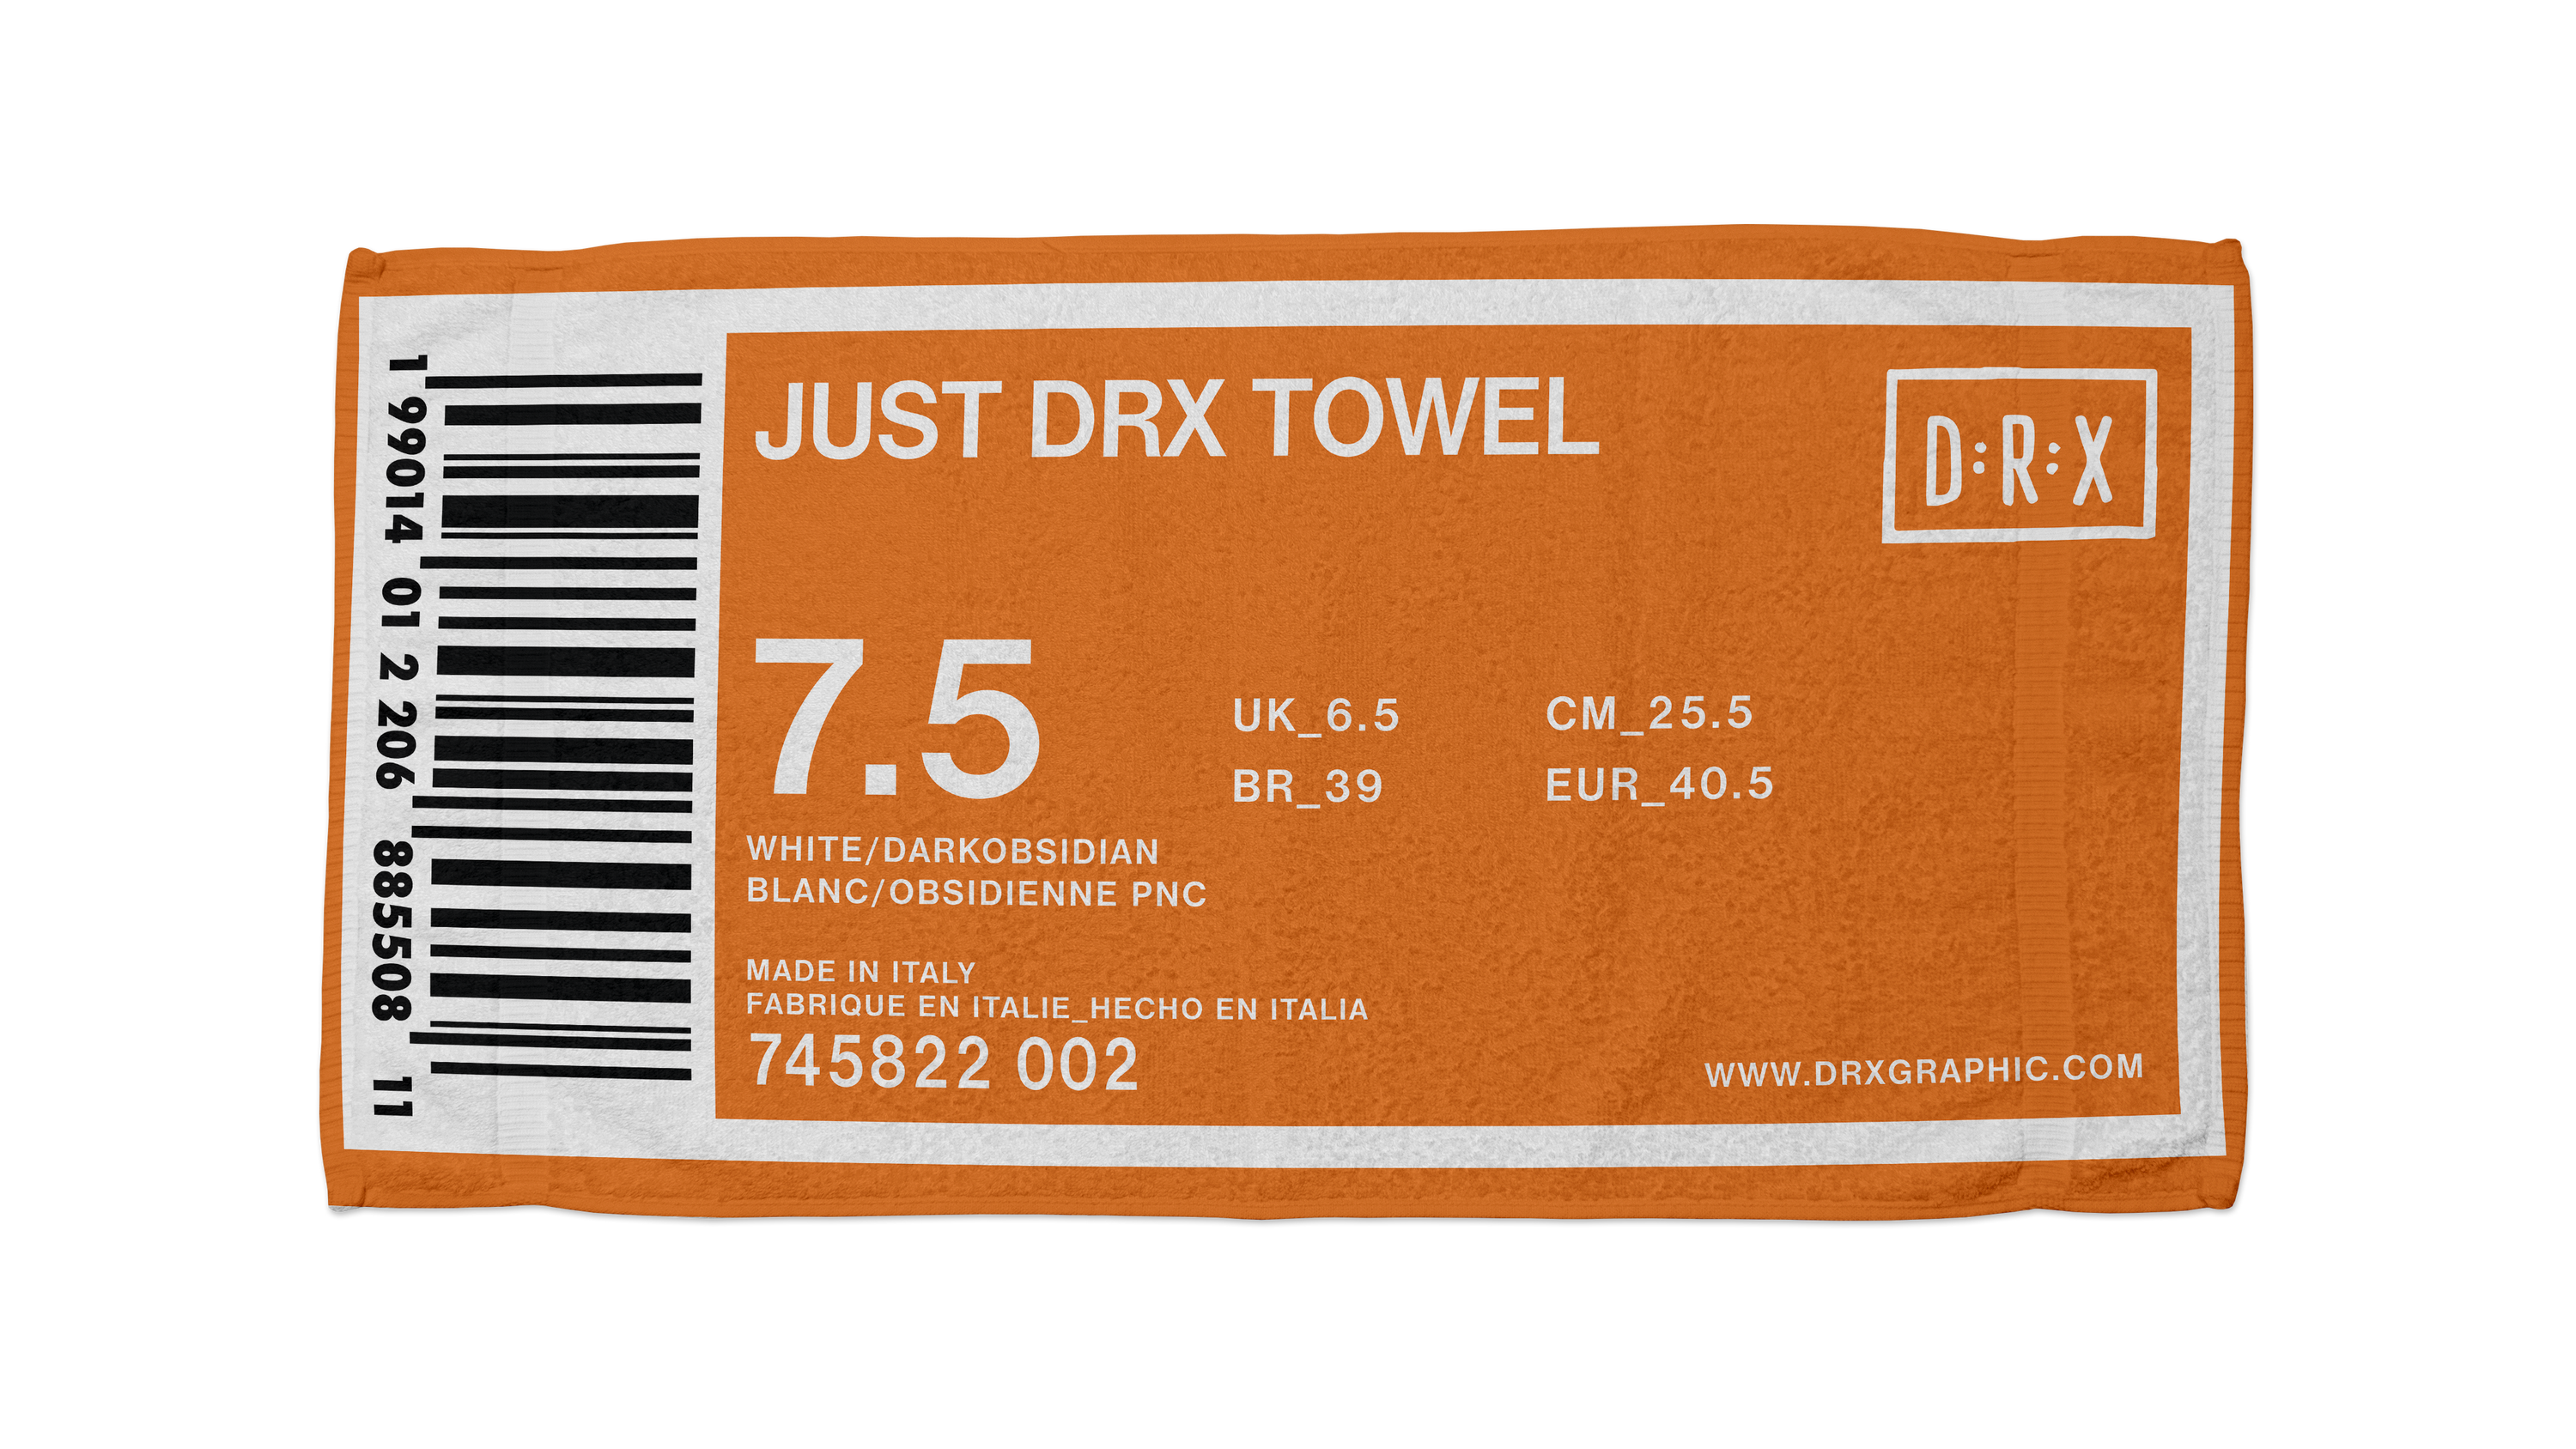 Just DRX Towel - AM1